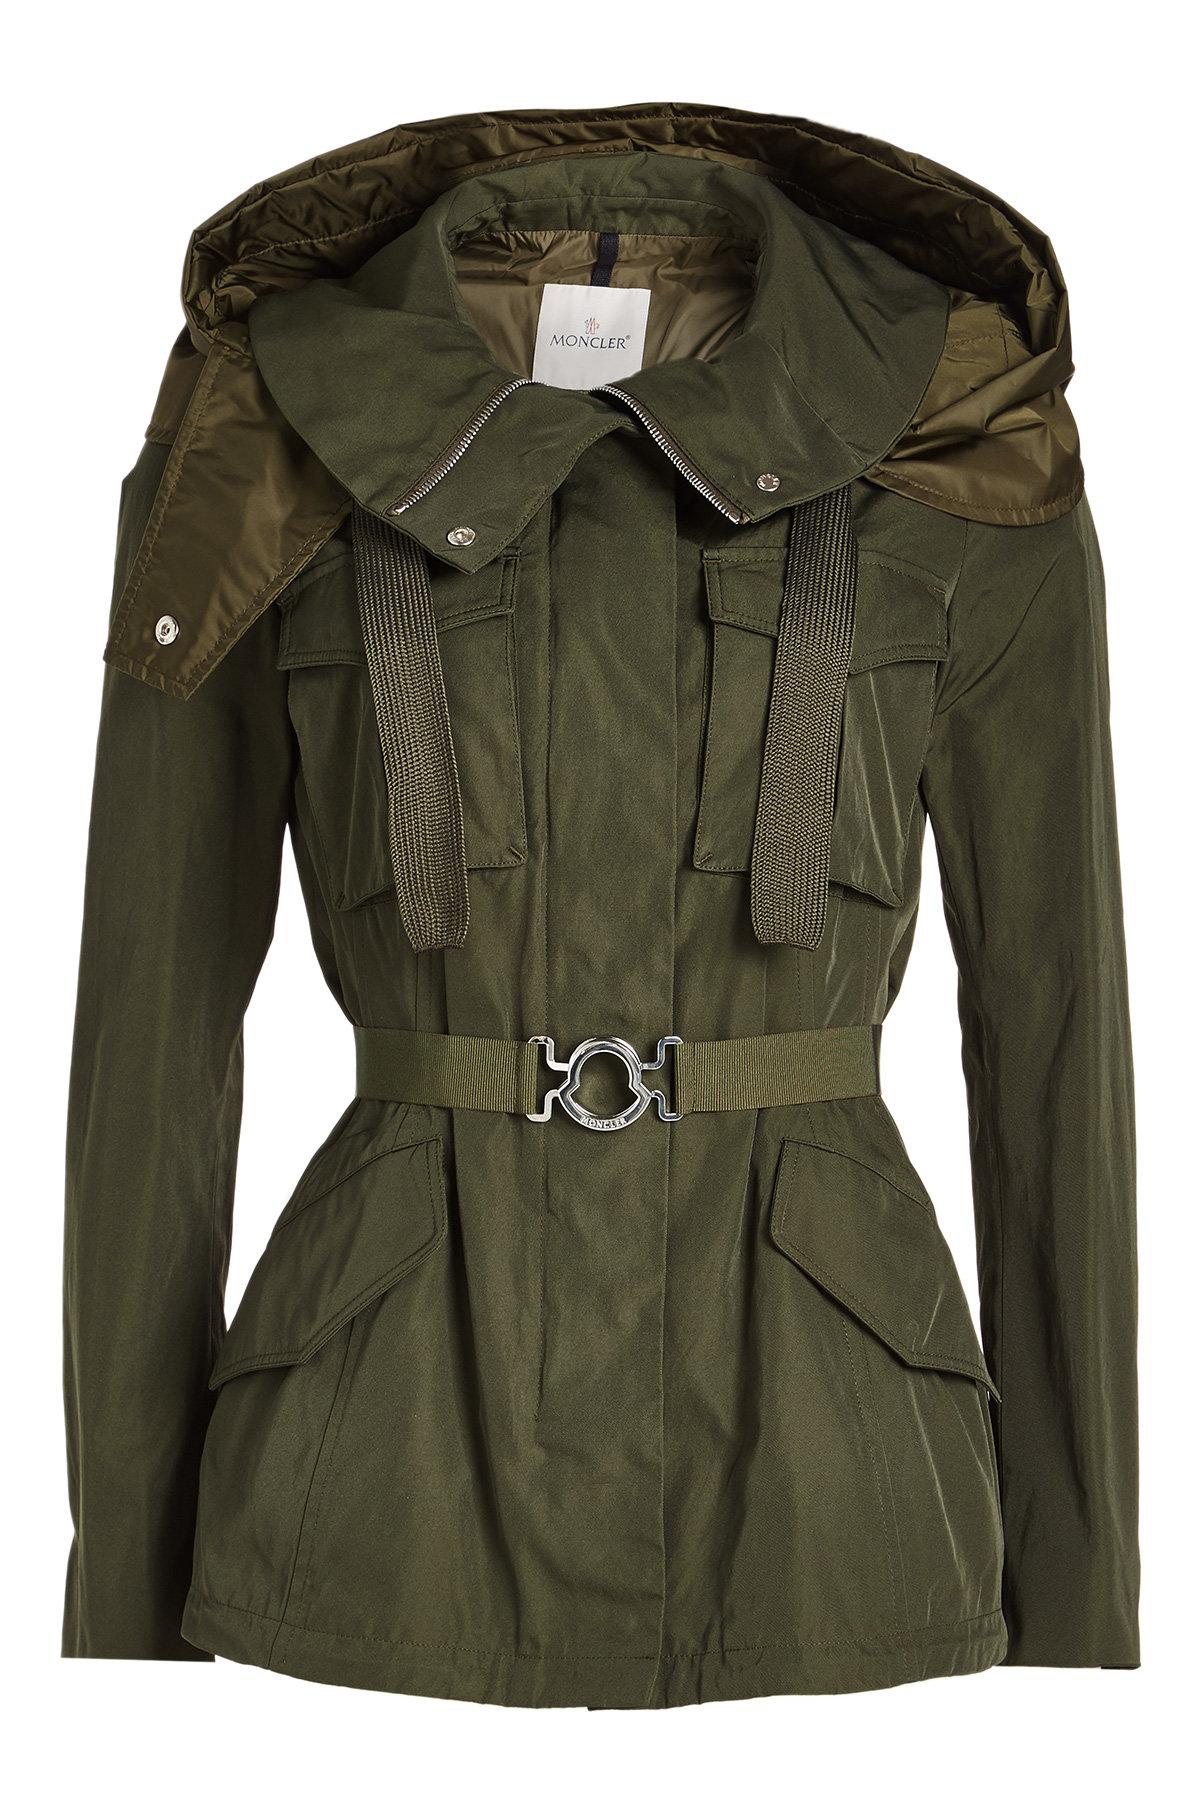 Moncler Cargo Jacket With Hood in Green - Lyst